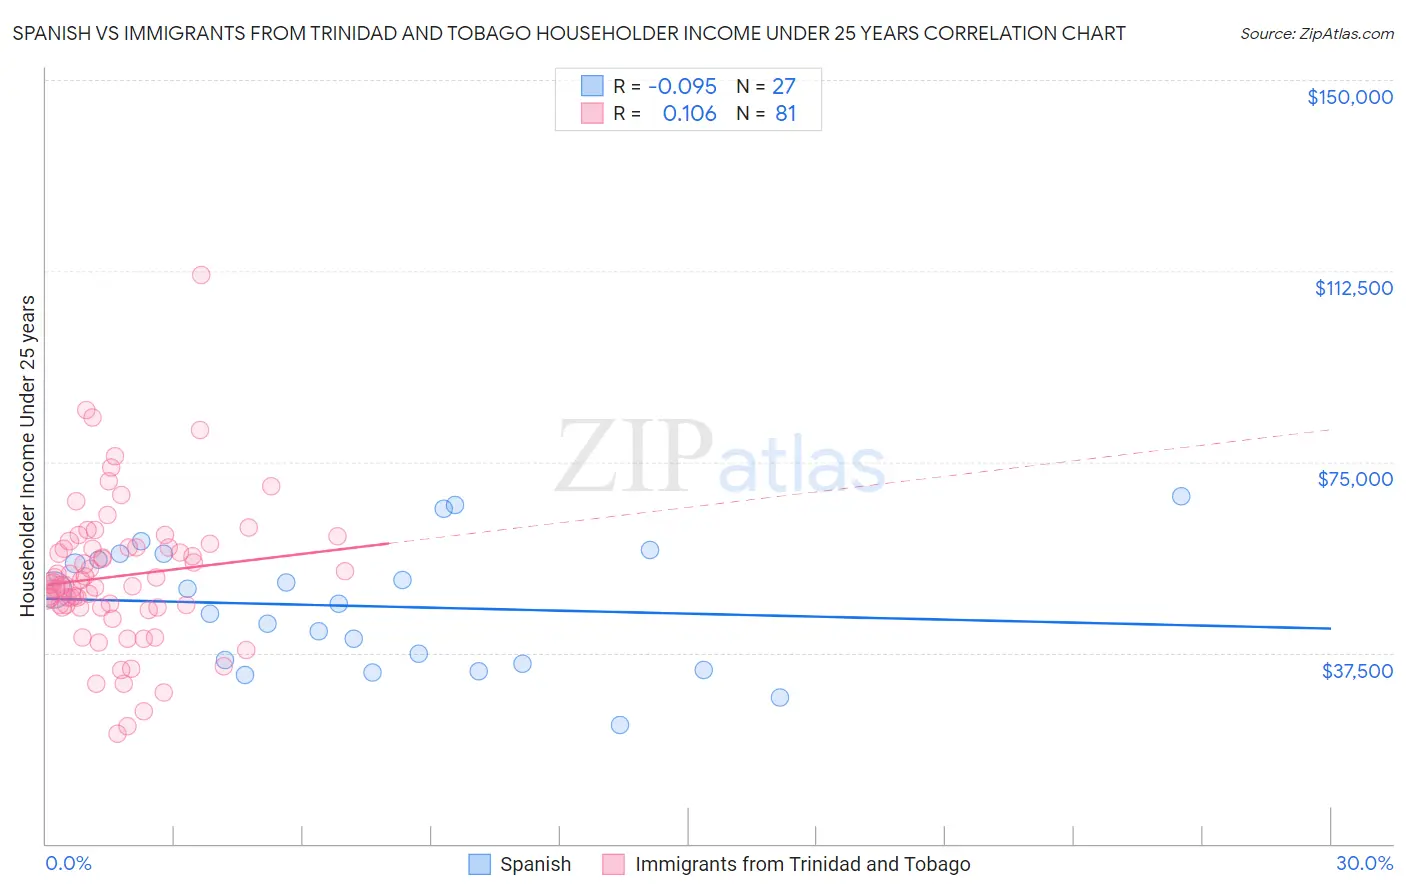 Spanish vs Immigrants from Trinidad and Tobago Householder Income Under 25 years